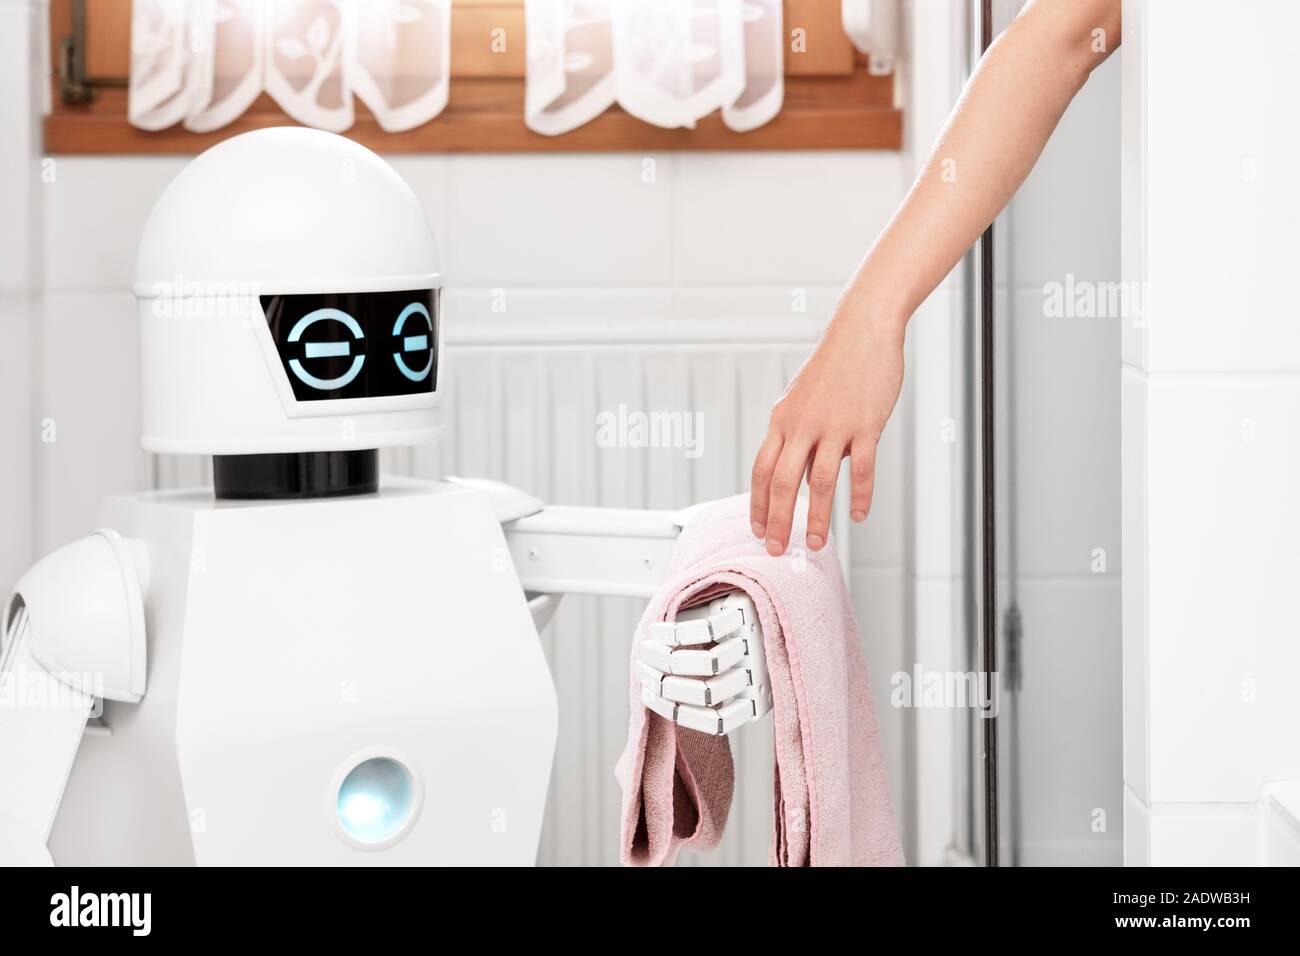 service Ambient Assisted Living robot is giving a towel to an women under the shower in the bathroom Stock Photo